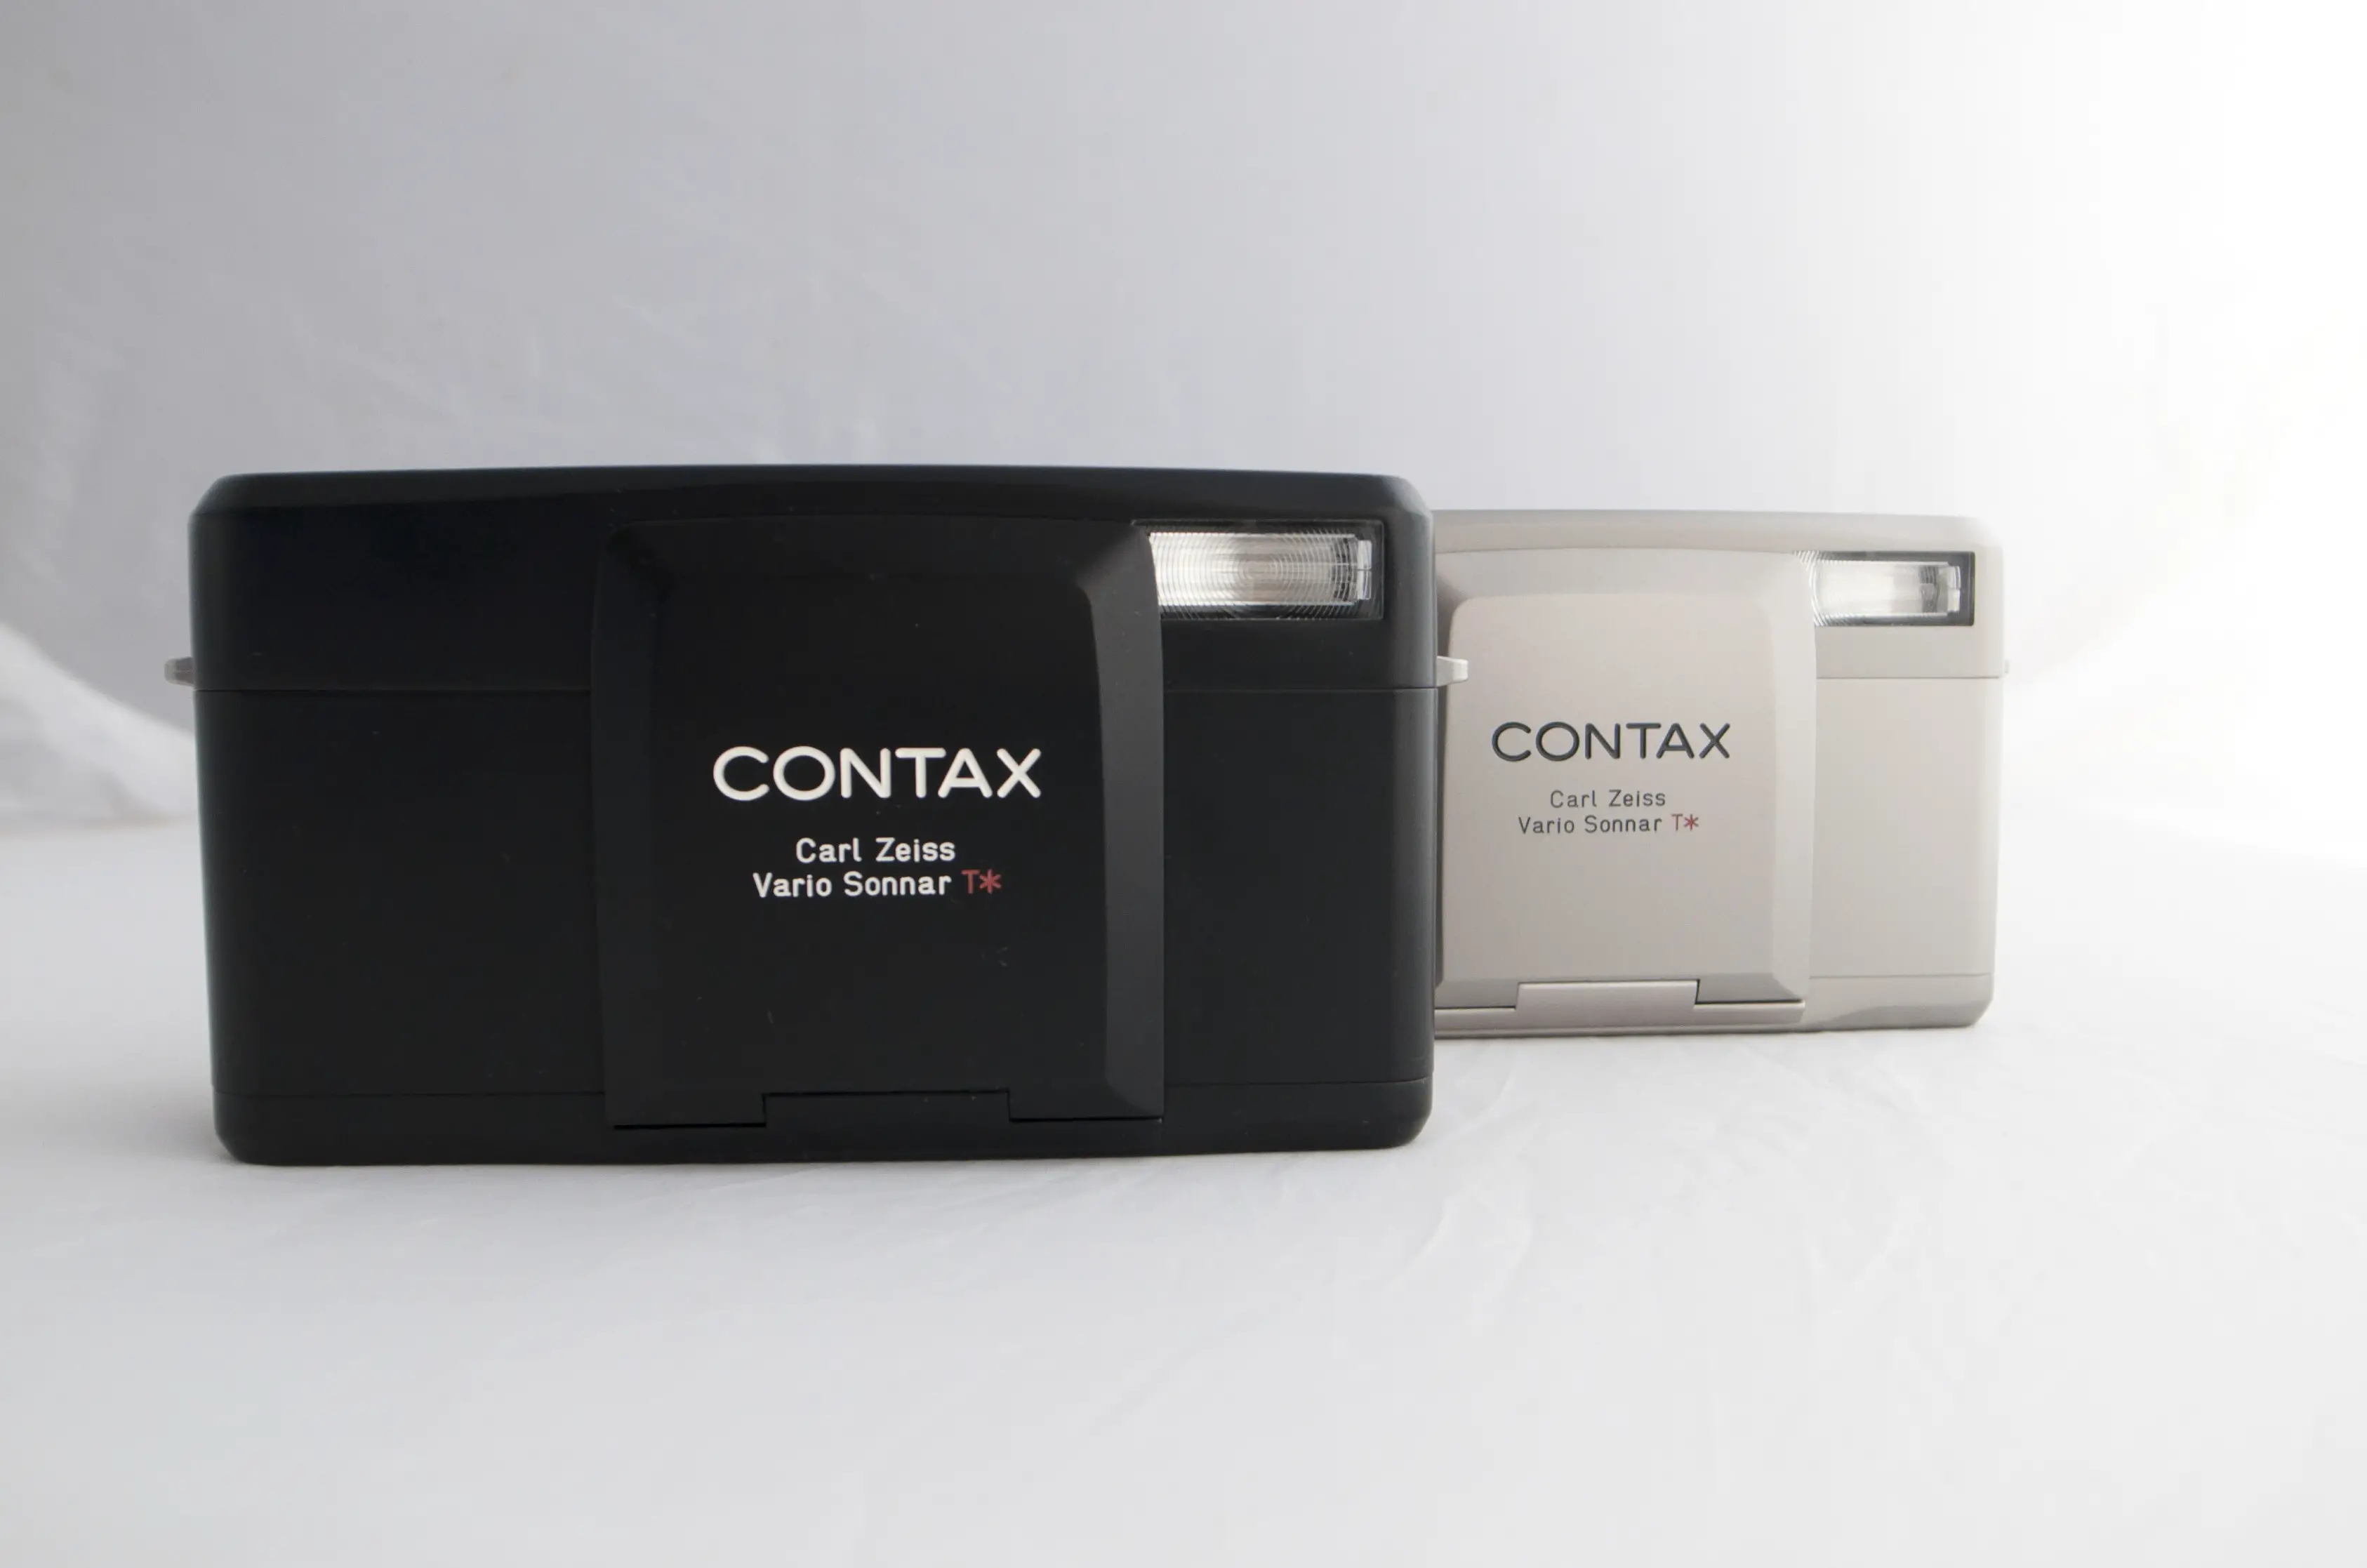 Contax compact cameras are awesome   Japan Camera Hunter